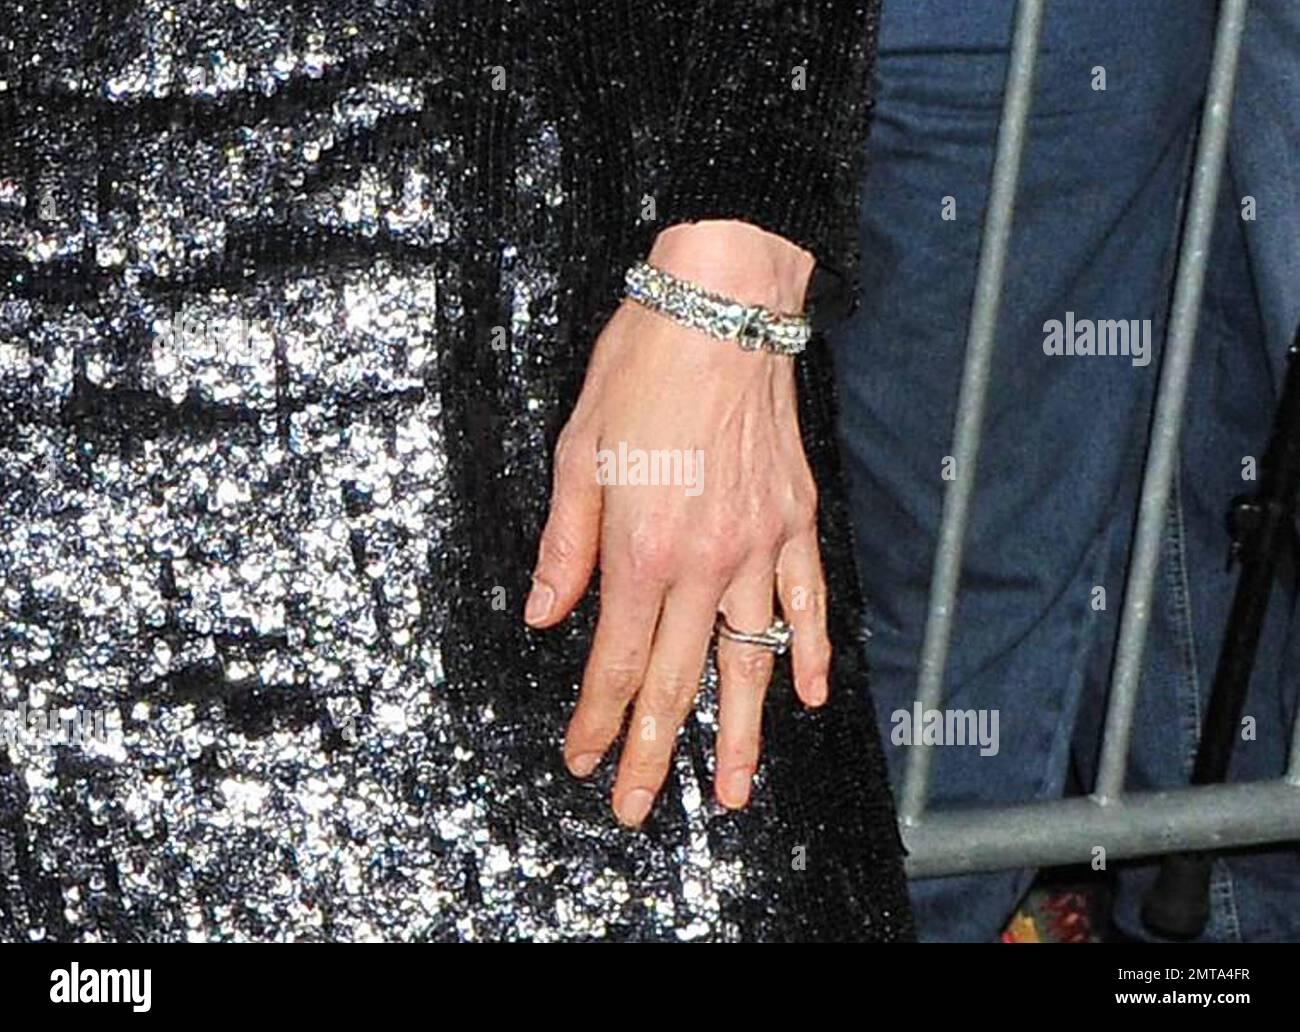 Bride to be Nancy Shevell shows off her engagement ring as she attendsÊthe  2011 New York City Ballet Fall Gala held at the David Koch Theatre at  Lincoln Center with fianceÊSir Paul